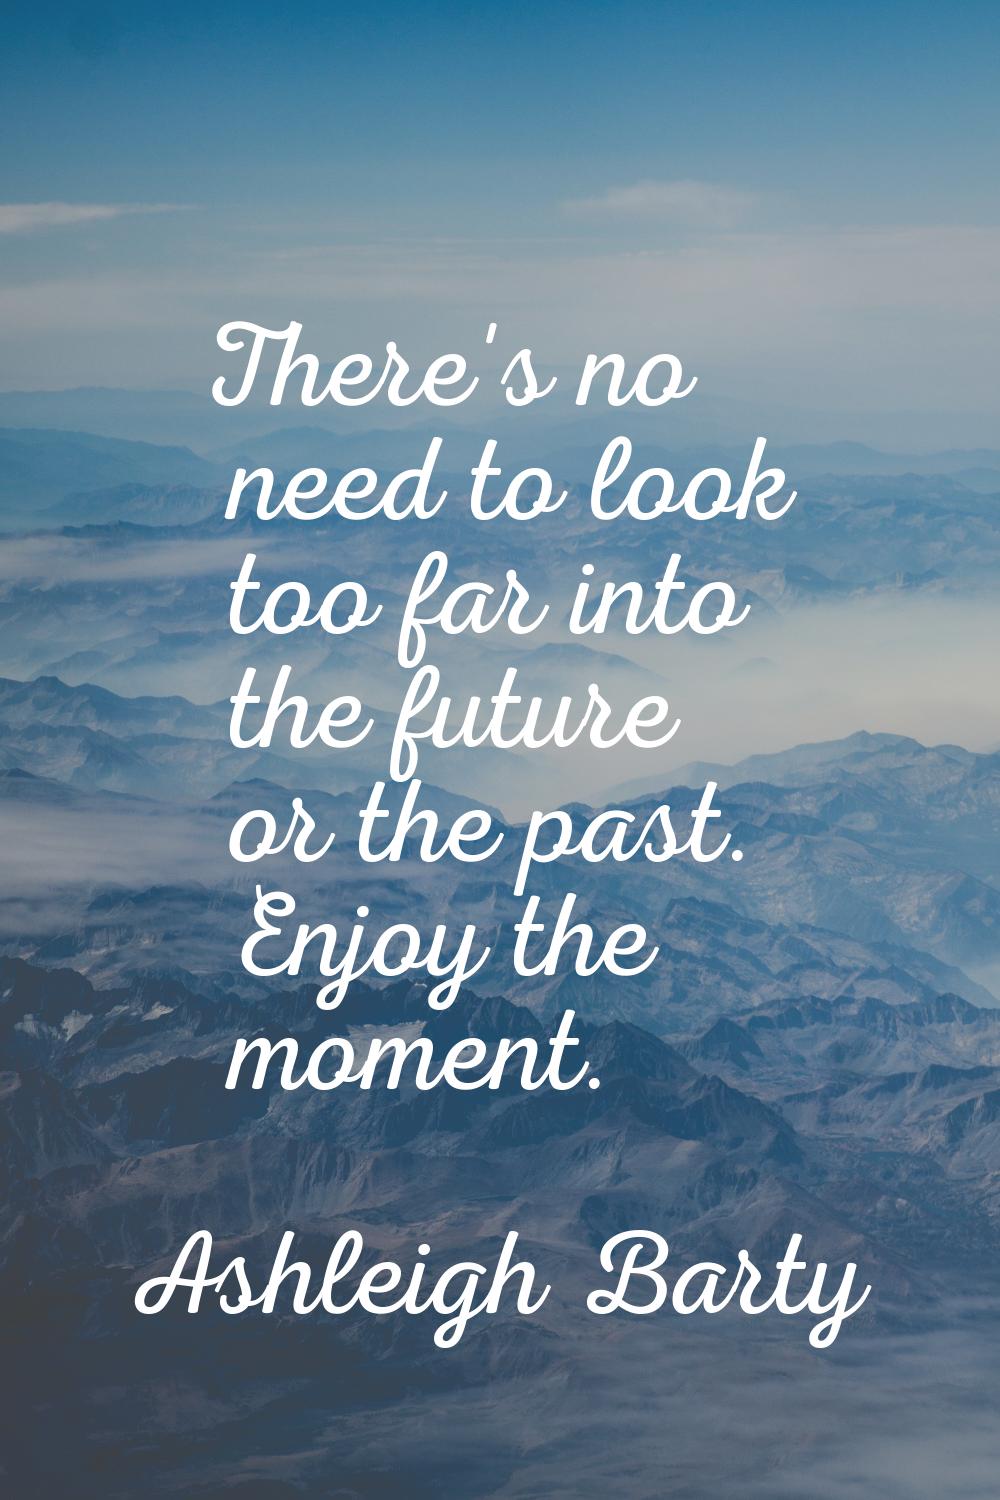 There's no need to look too far into the future or the past. Enjoy the moment.